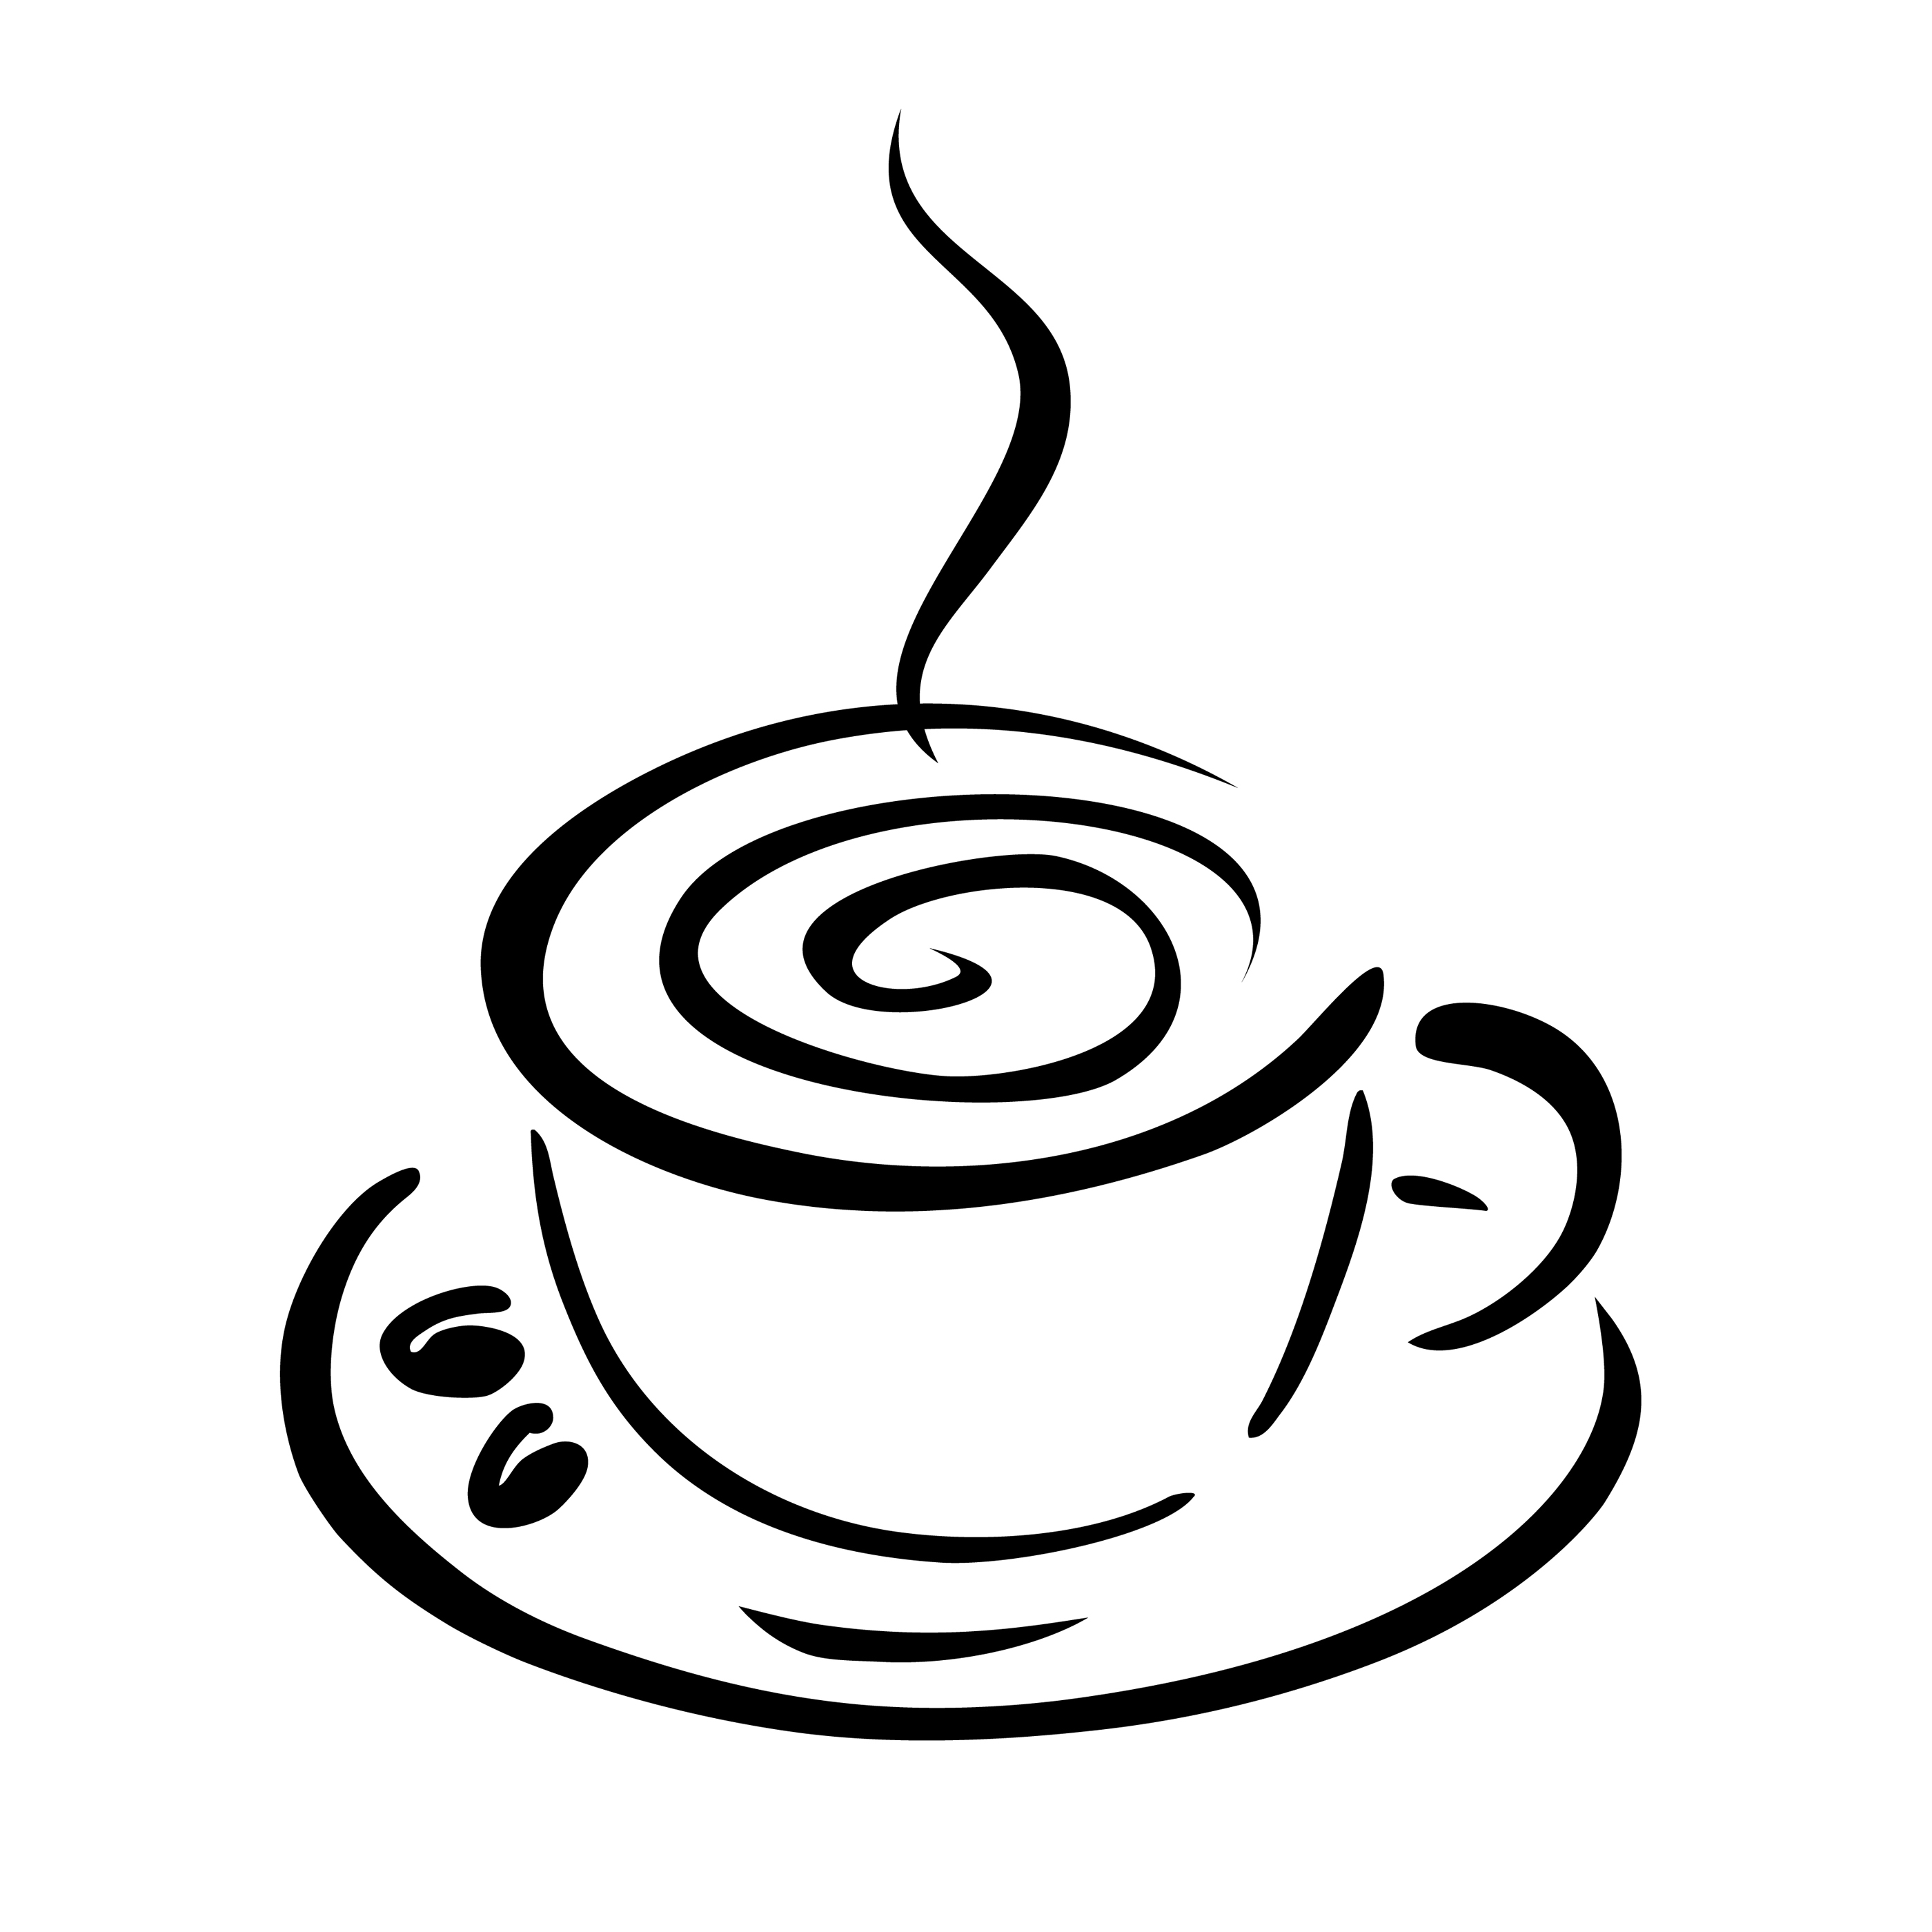 coffee cup clip art black whi - Coffee Cup Clip Art Free